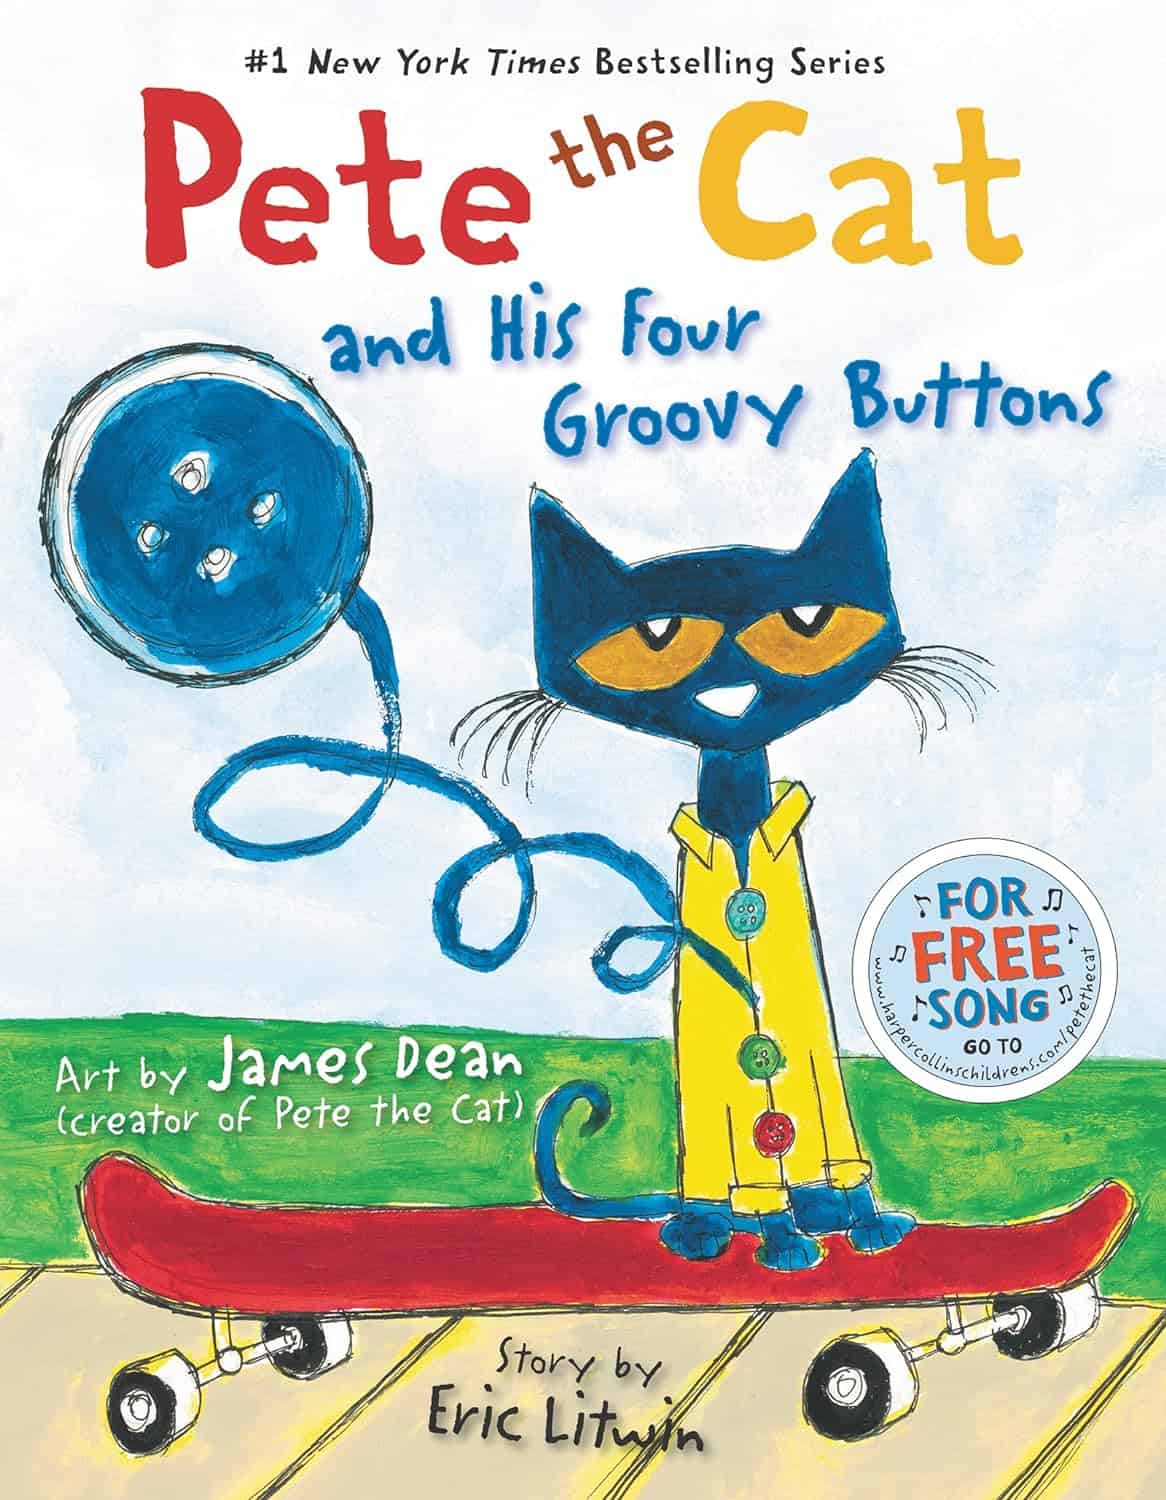 Pete the Cat and His Four Groovy Buttons by Eric Litwin and Illustrated by James Dean